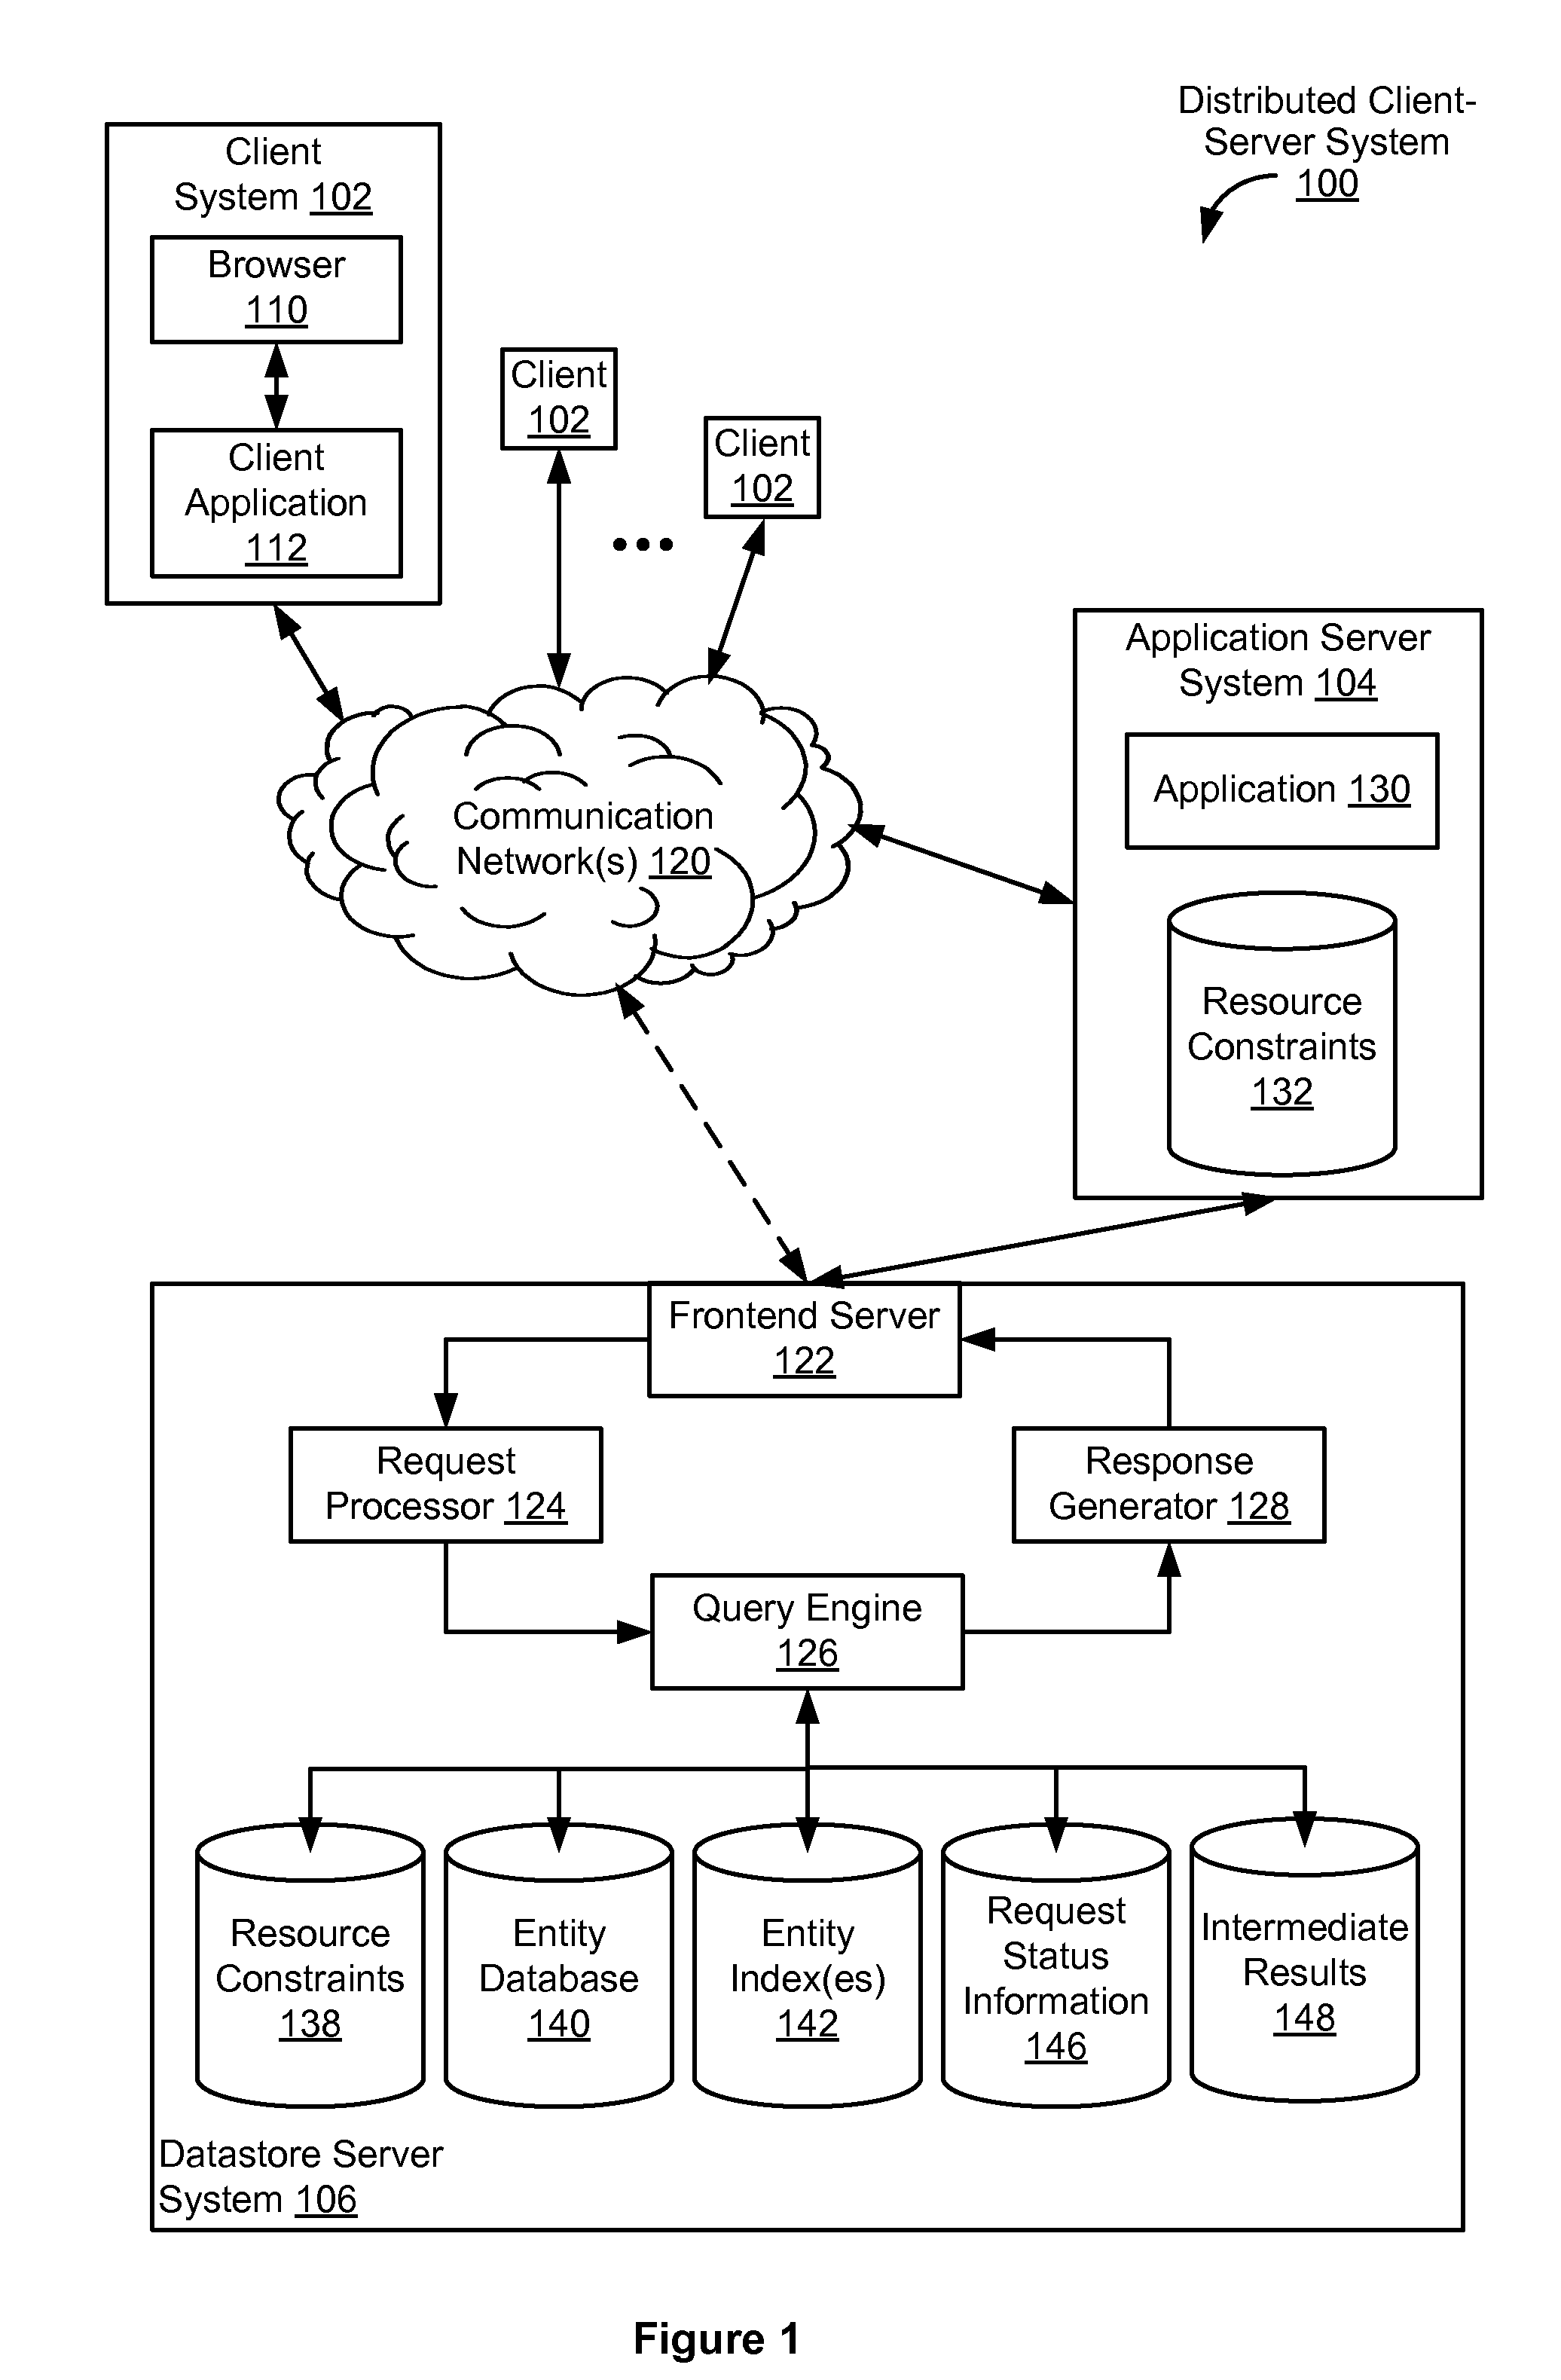 Application of resource limits to request processing